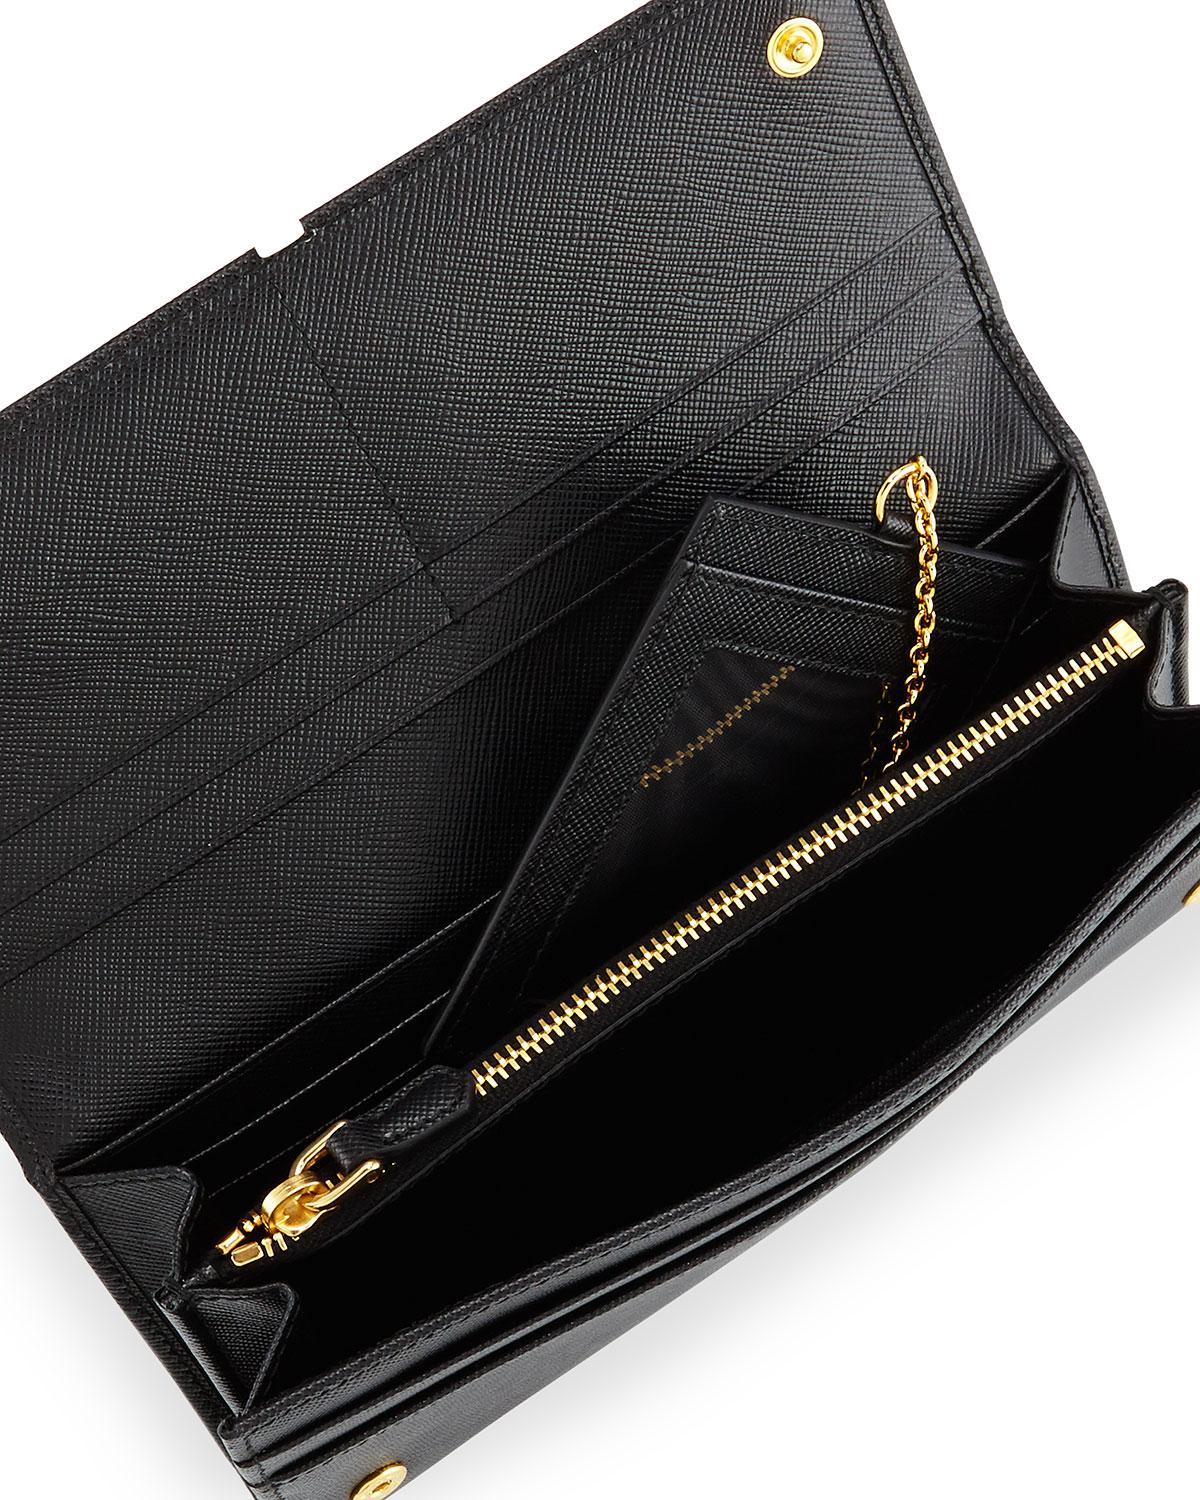 Prada Textured Leather Continental Wallet in Black - Lyst